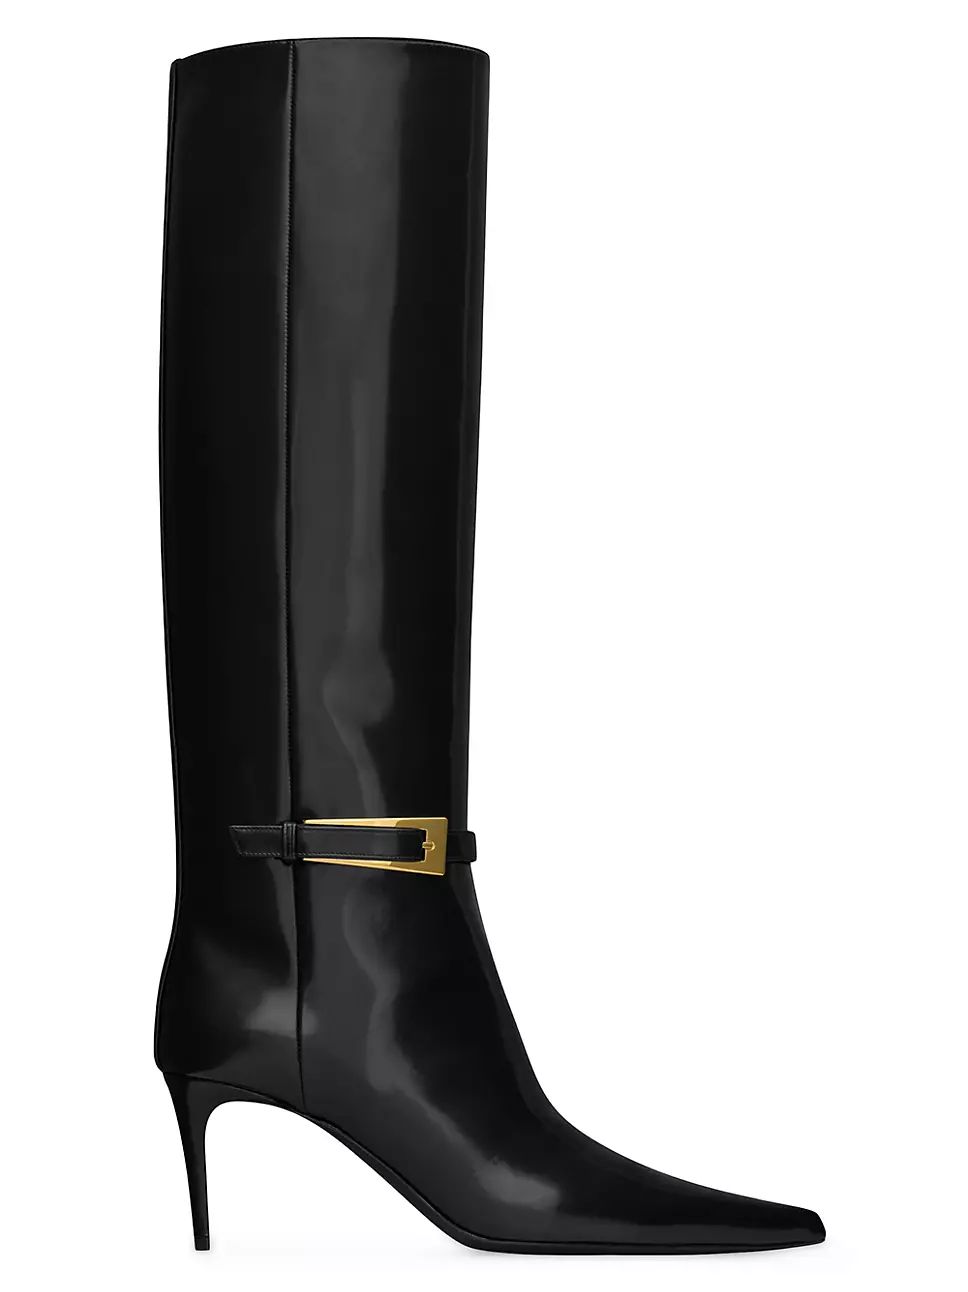 Lee Boots In Glazed Leather | Saks Fifth Avenue